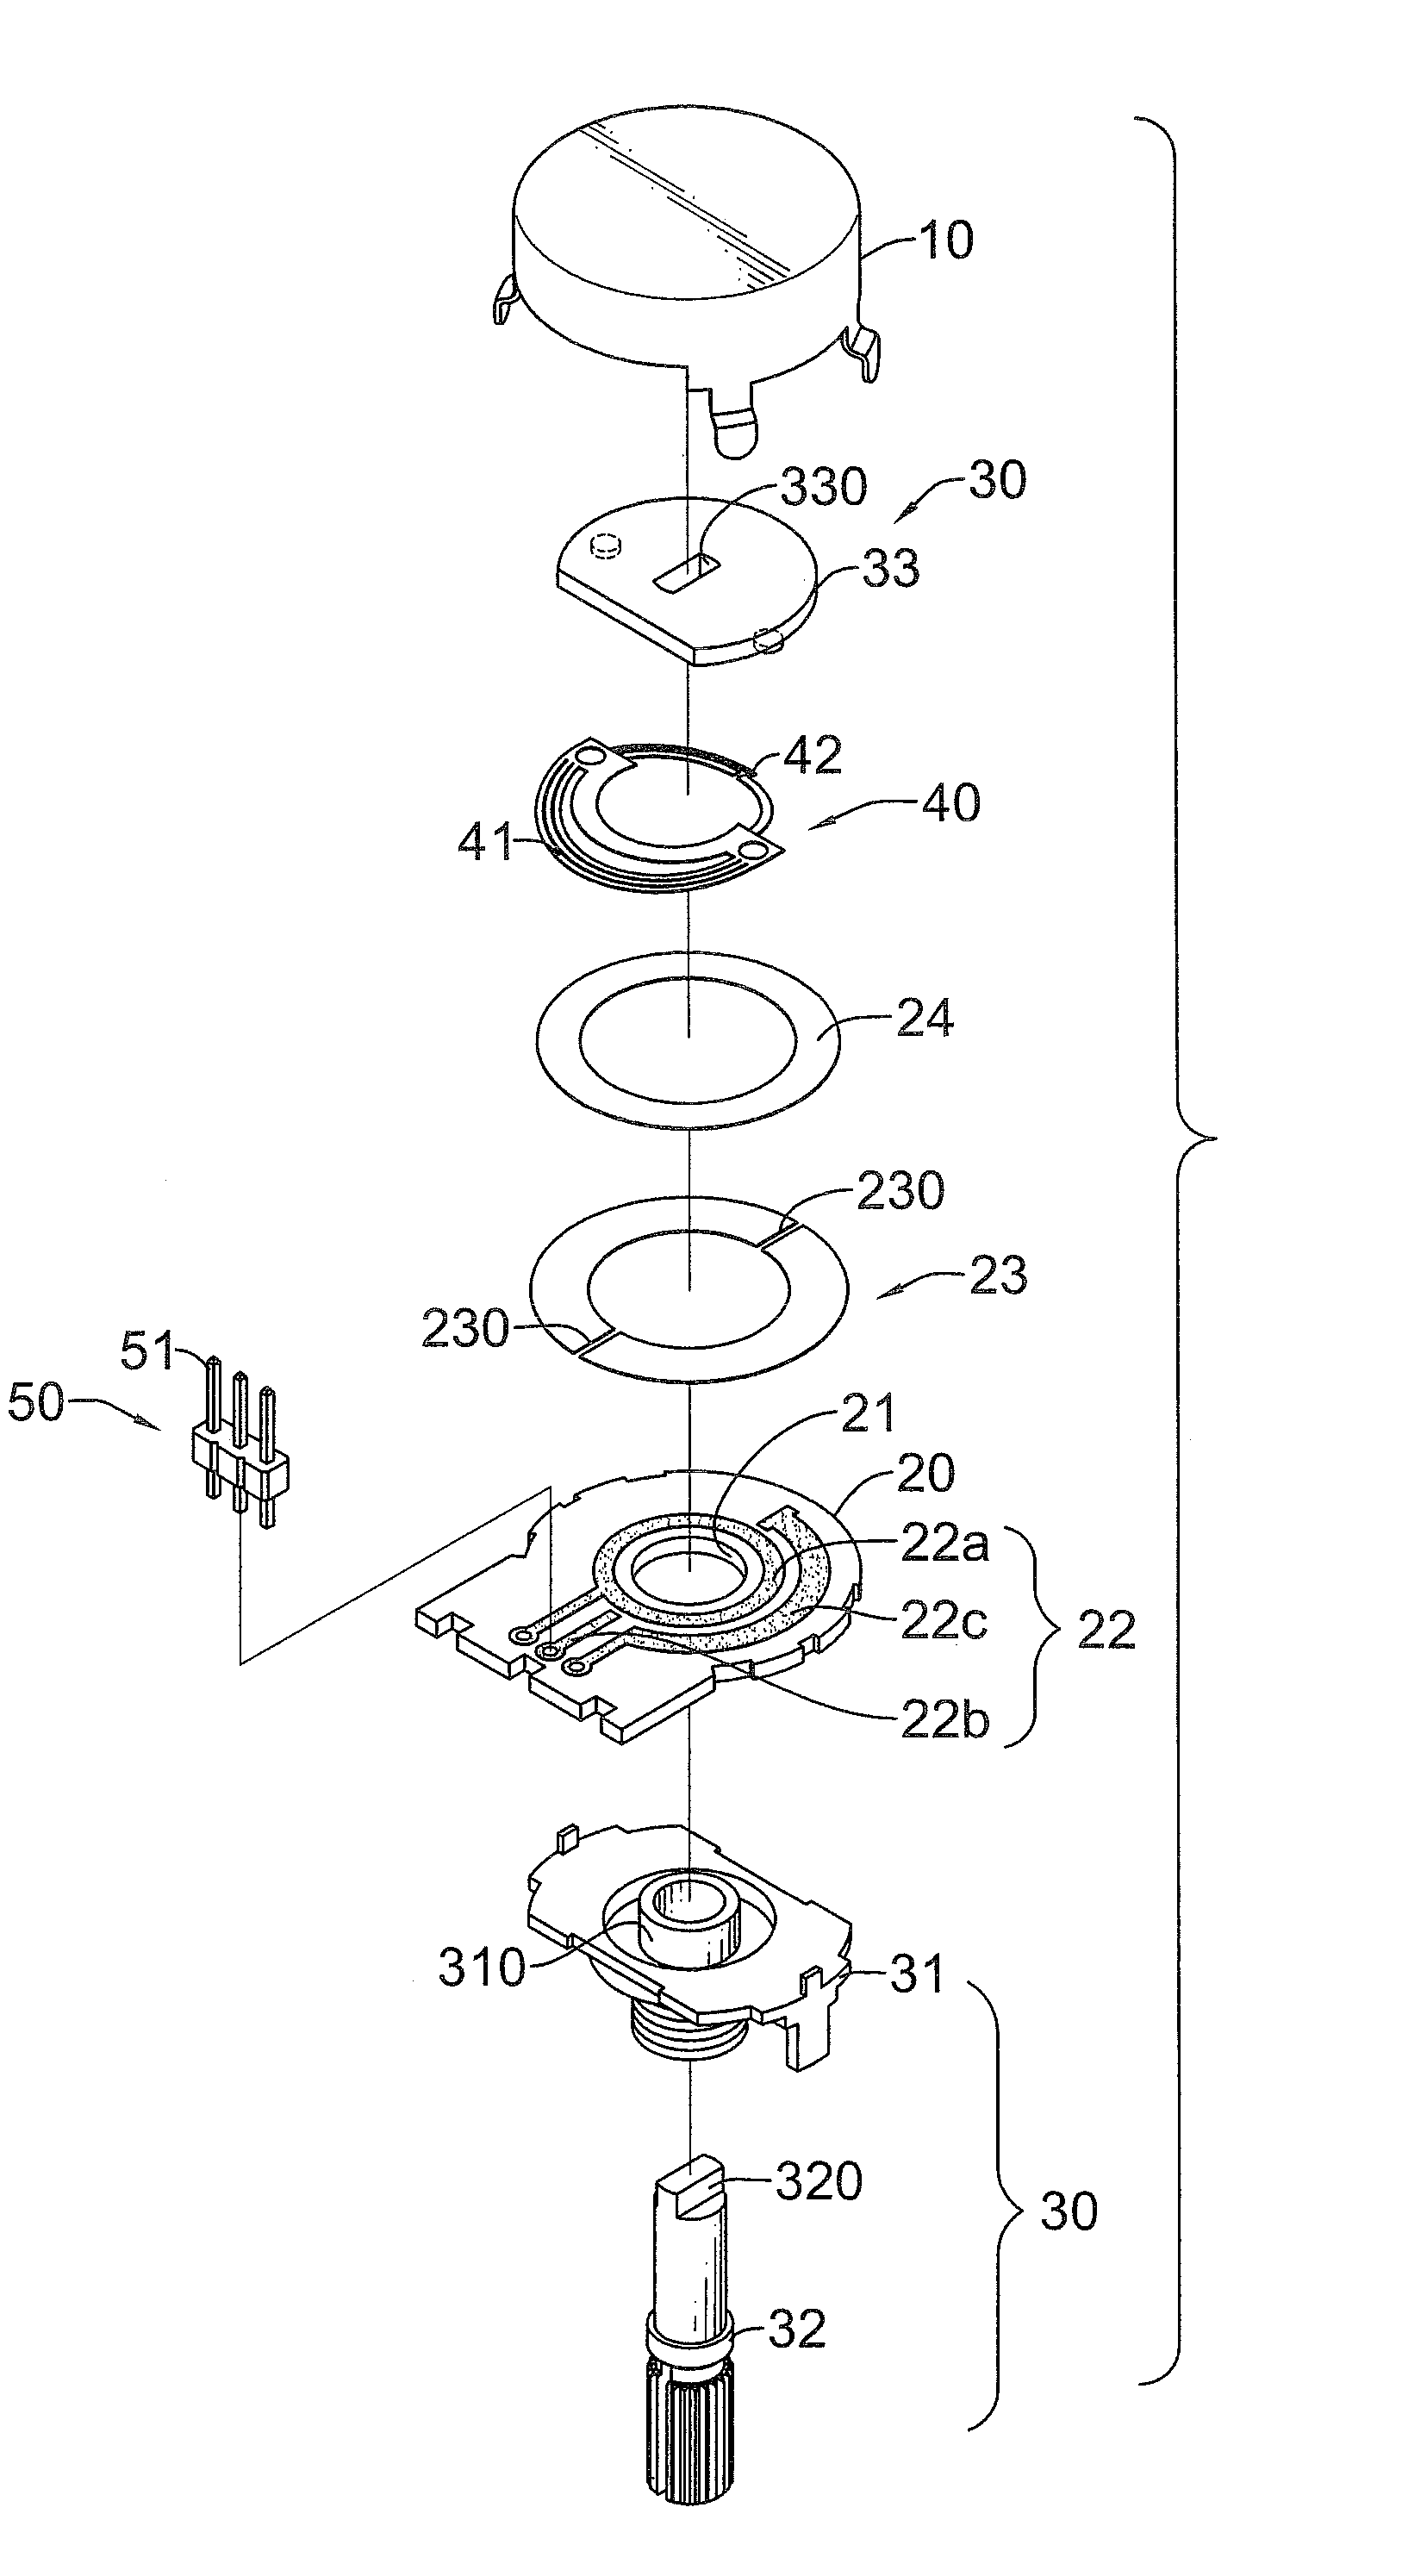 Variable resistor without rotation angle limitation and having regular changes in resistance value